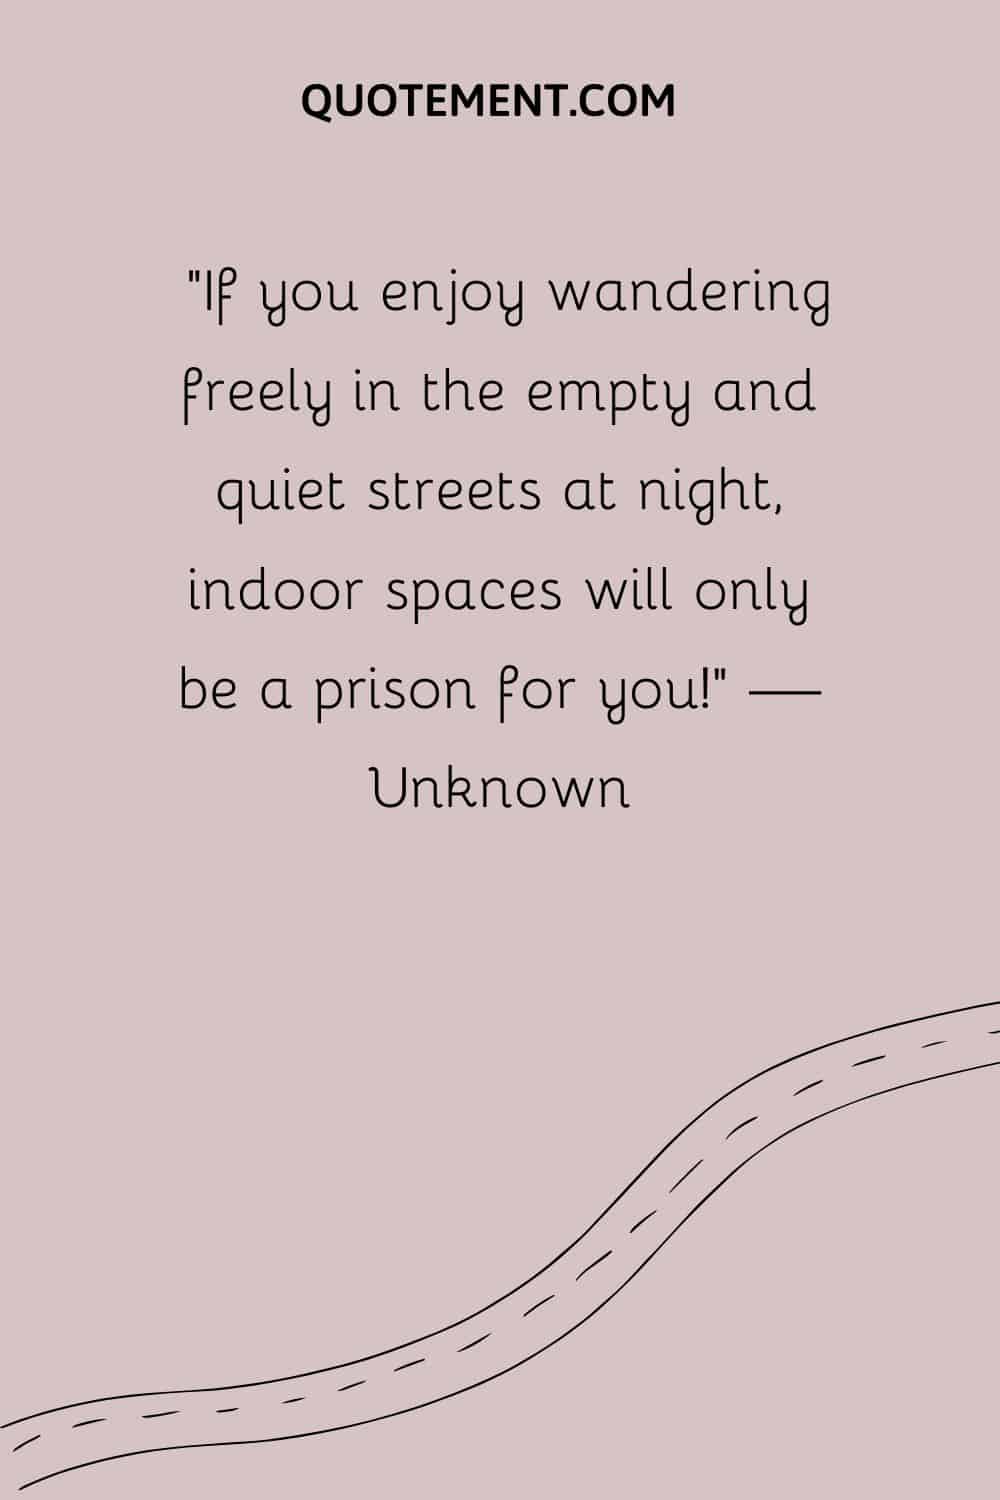 If you enjoy wandering freely in the empty and quiet streets at night, indoor spaces will only be a prison for you